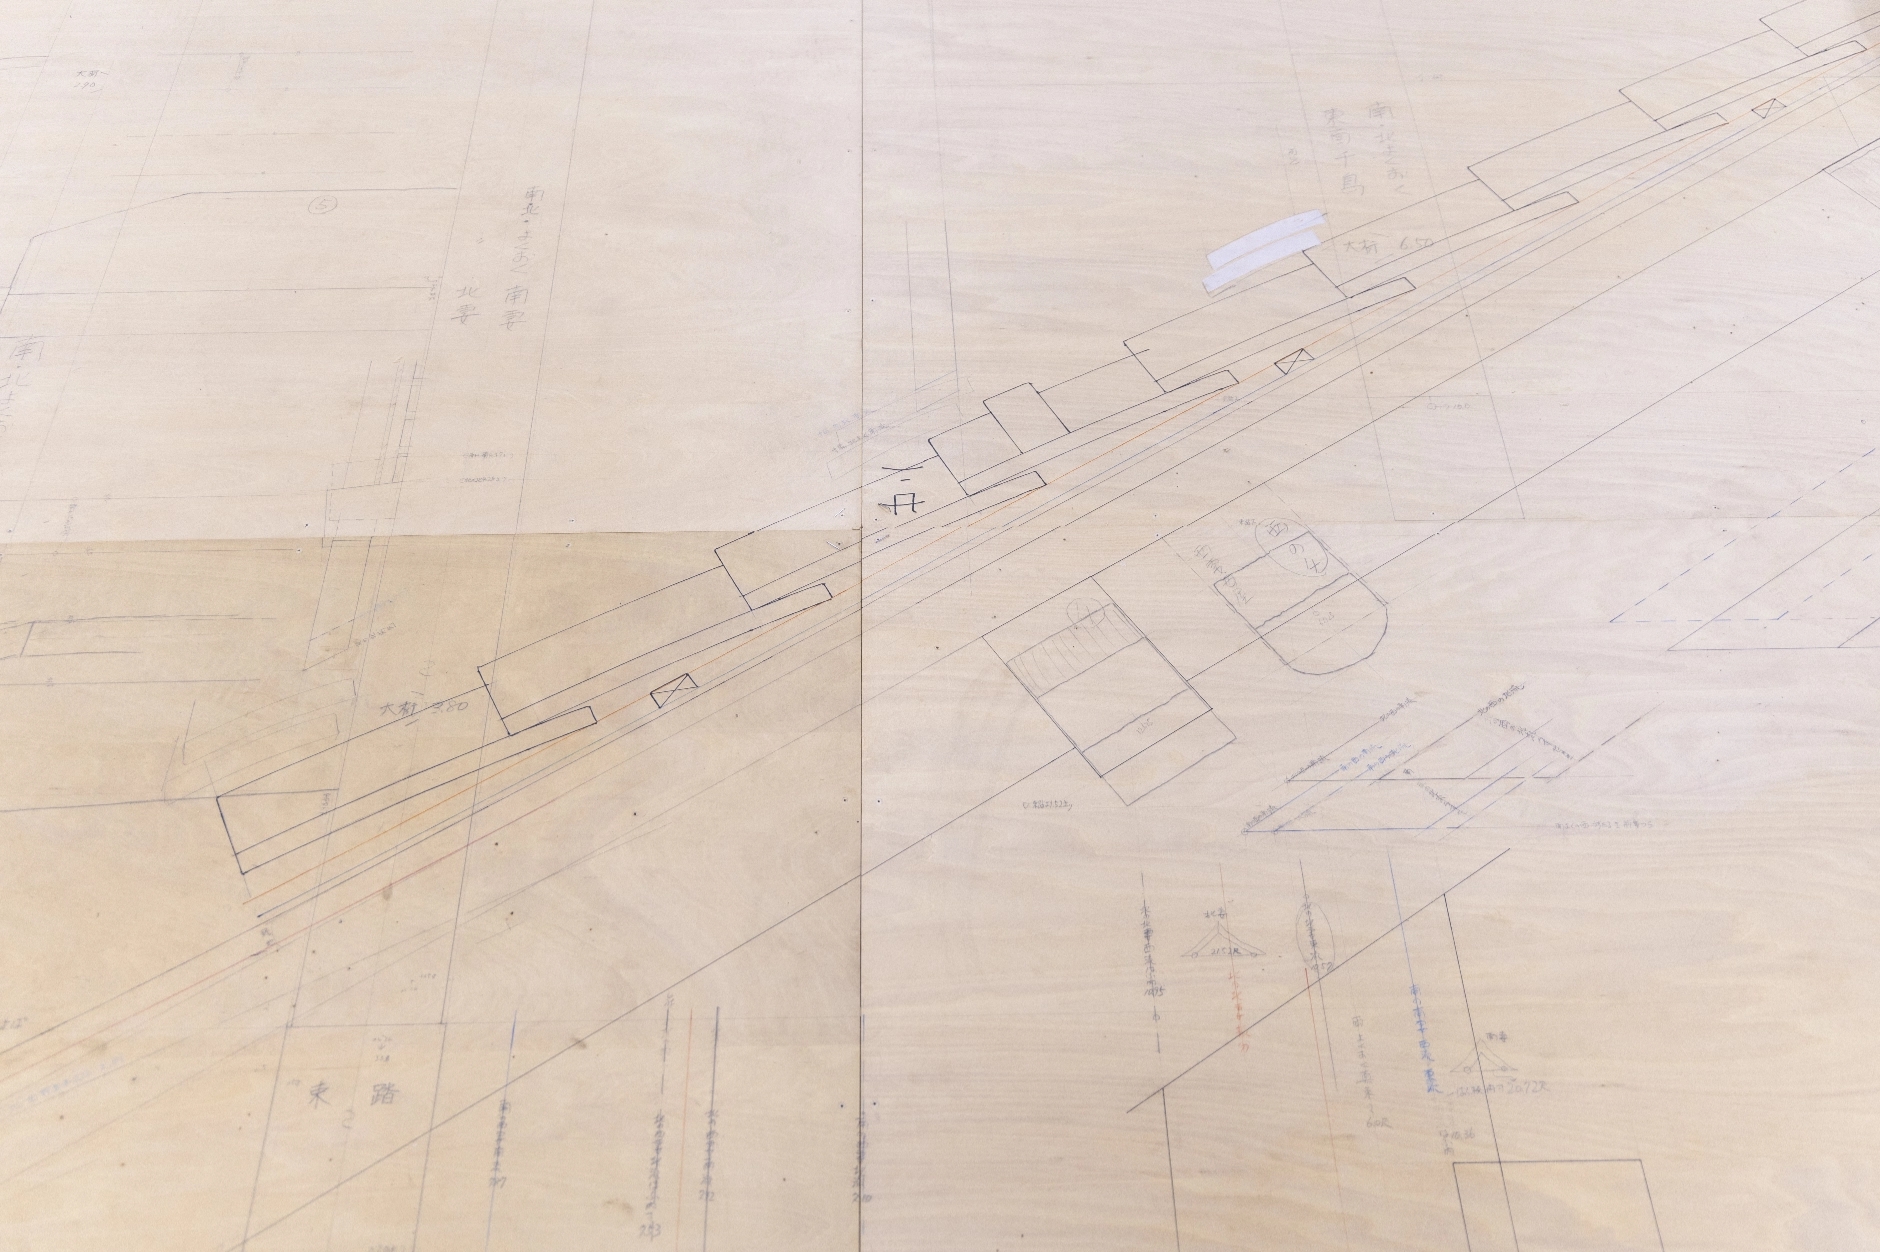 Full-size drawing on plywood